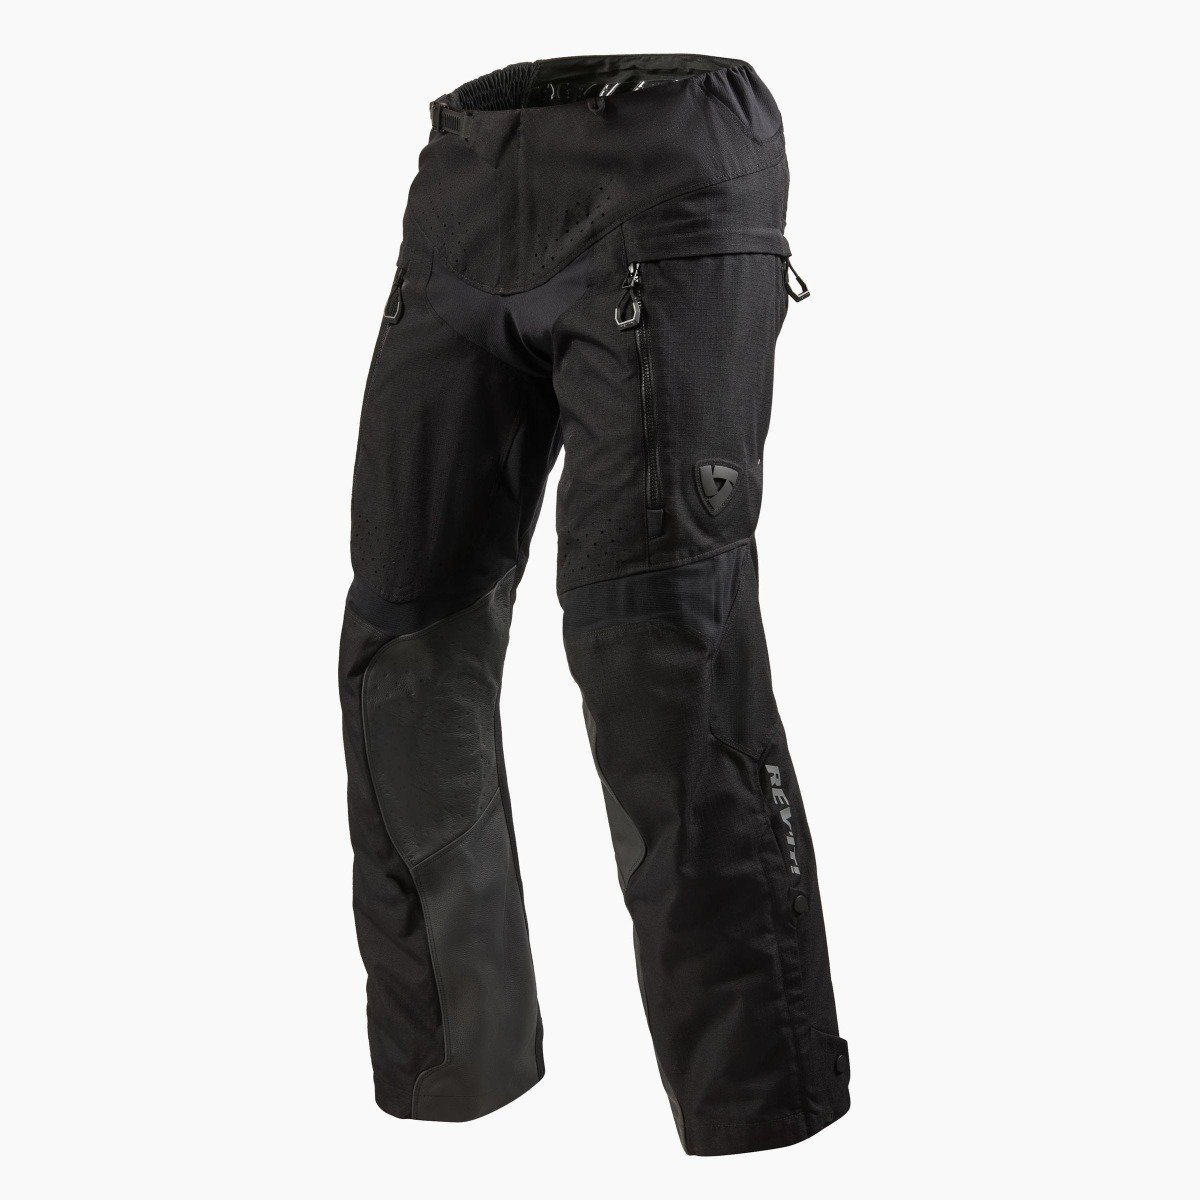 Image of REV'IT! Continent Black Motorcycle Pants Talla XL